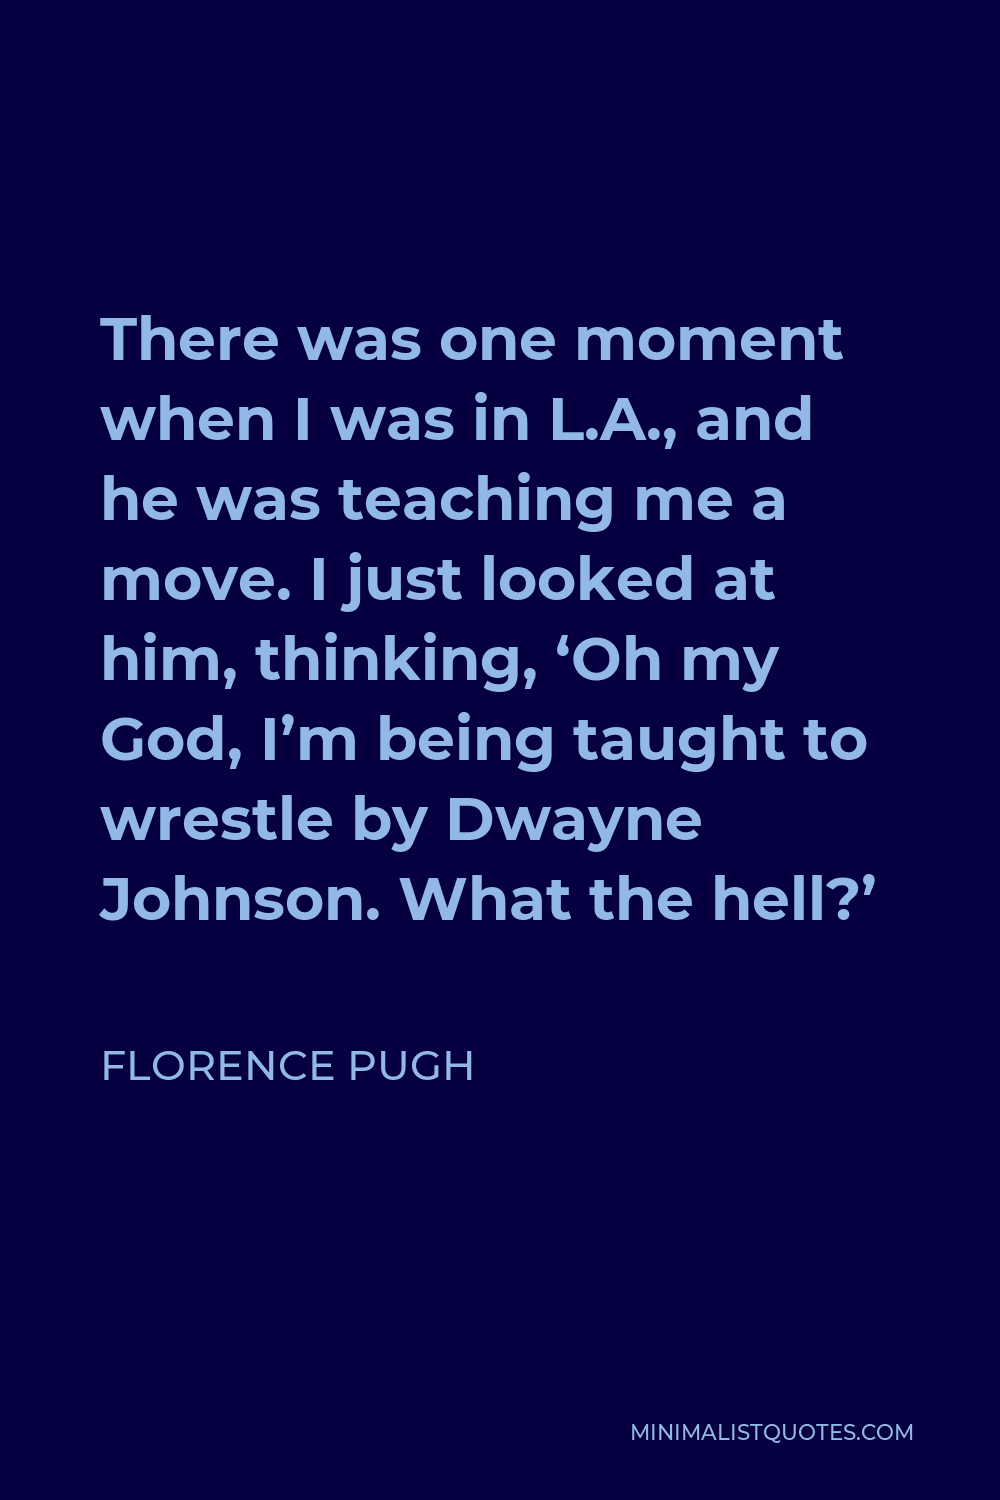 Florence Pugh Quote - There was one moment when I was in L.A., and he was teaching me a move. I just looked at him, thinking, ‘Oh my God, I’m being taught to wrestle by Dwayne Johnson. What the hell?’